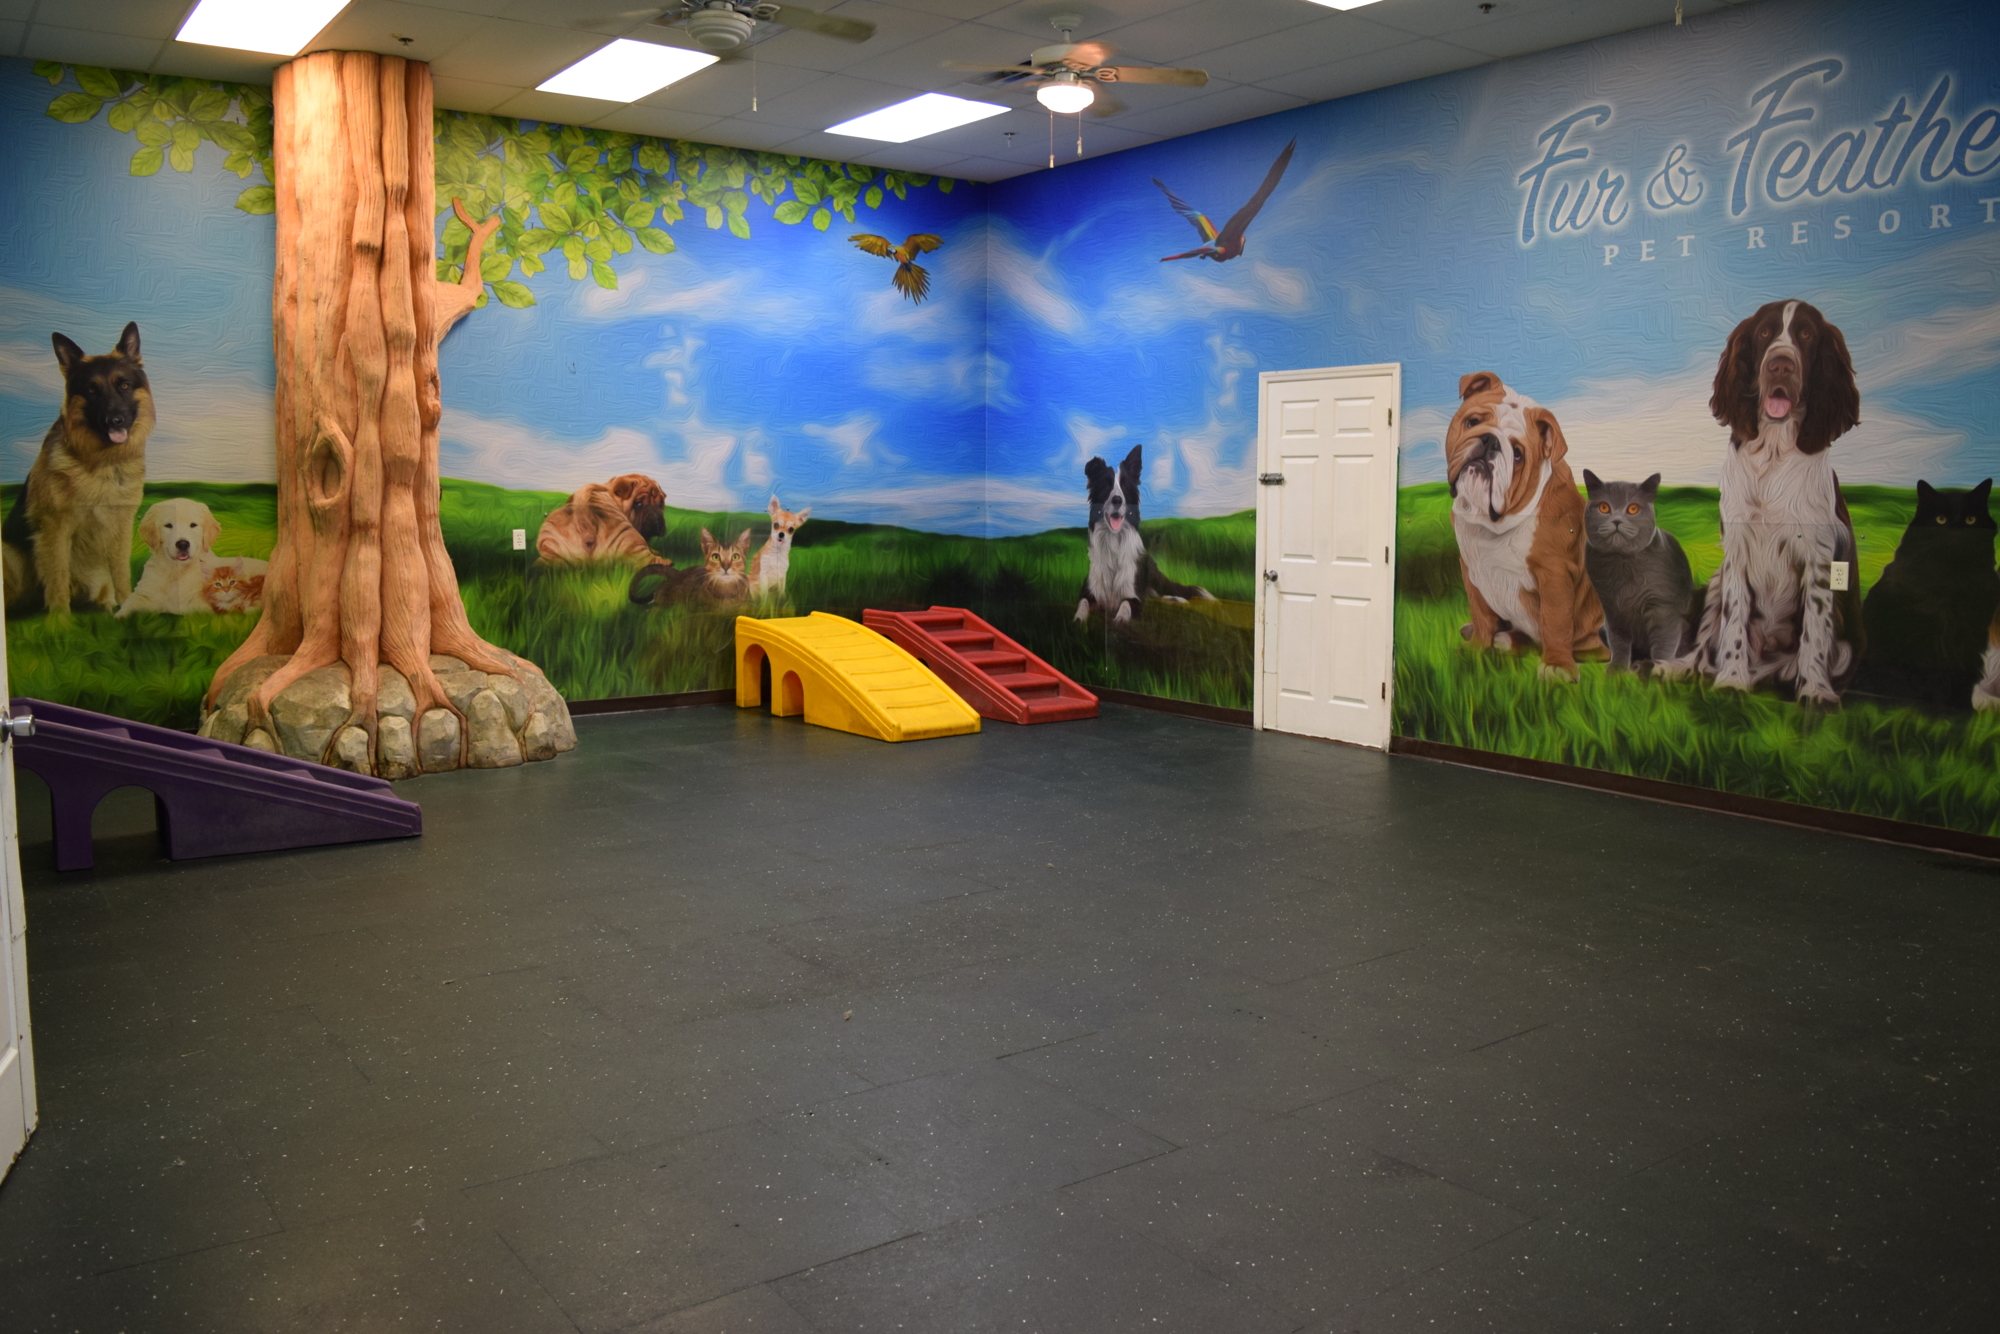 Fur & Feathers Pet Resort owner Darren Korito said the facility has two separate playrooms for small and big dogs.